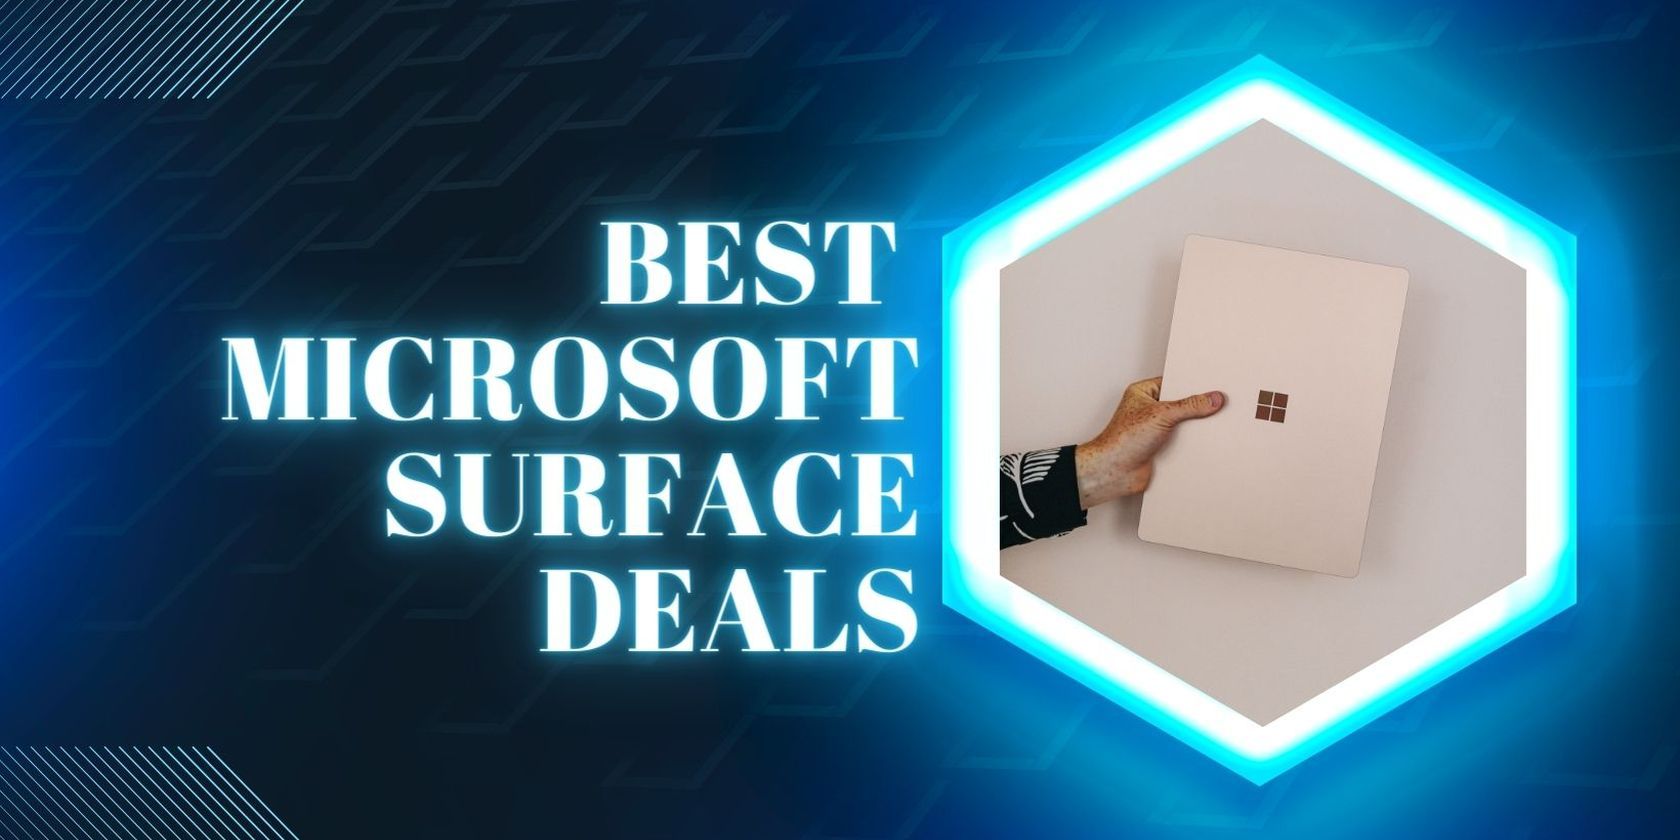 Best Microsoft Surface Deals text with hand holding tablet